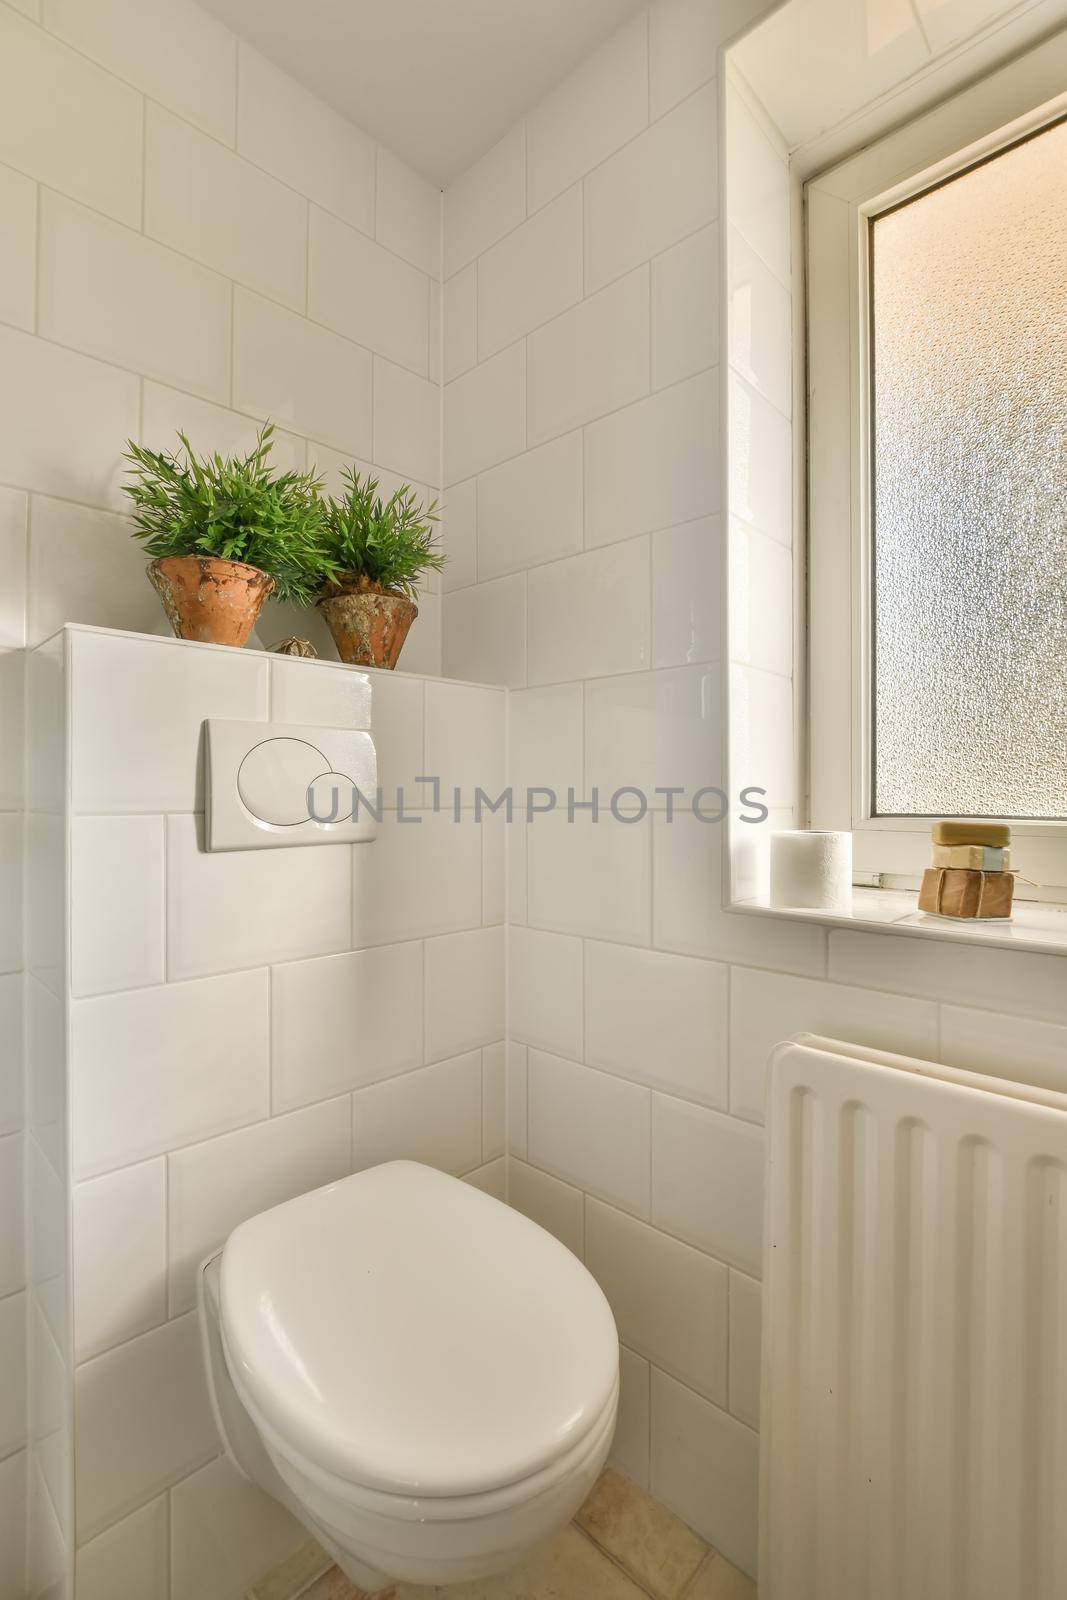 The interior of the bathroom with indoor plants, a hinged toilet next to the window